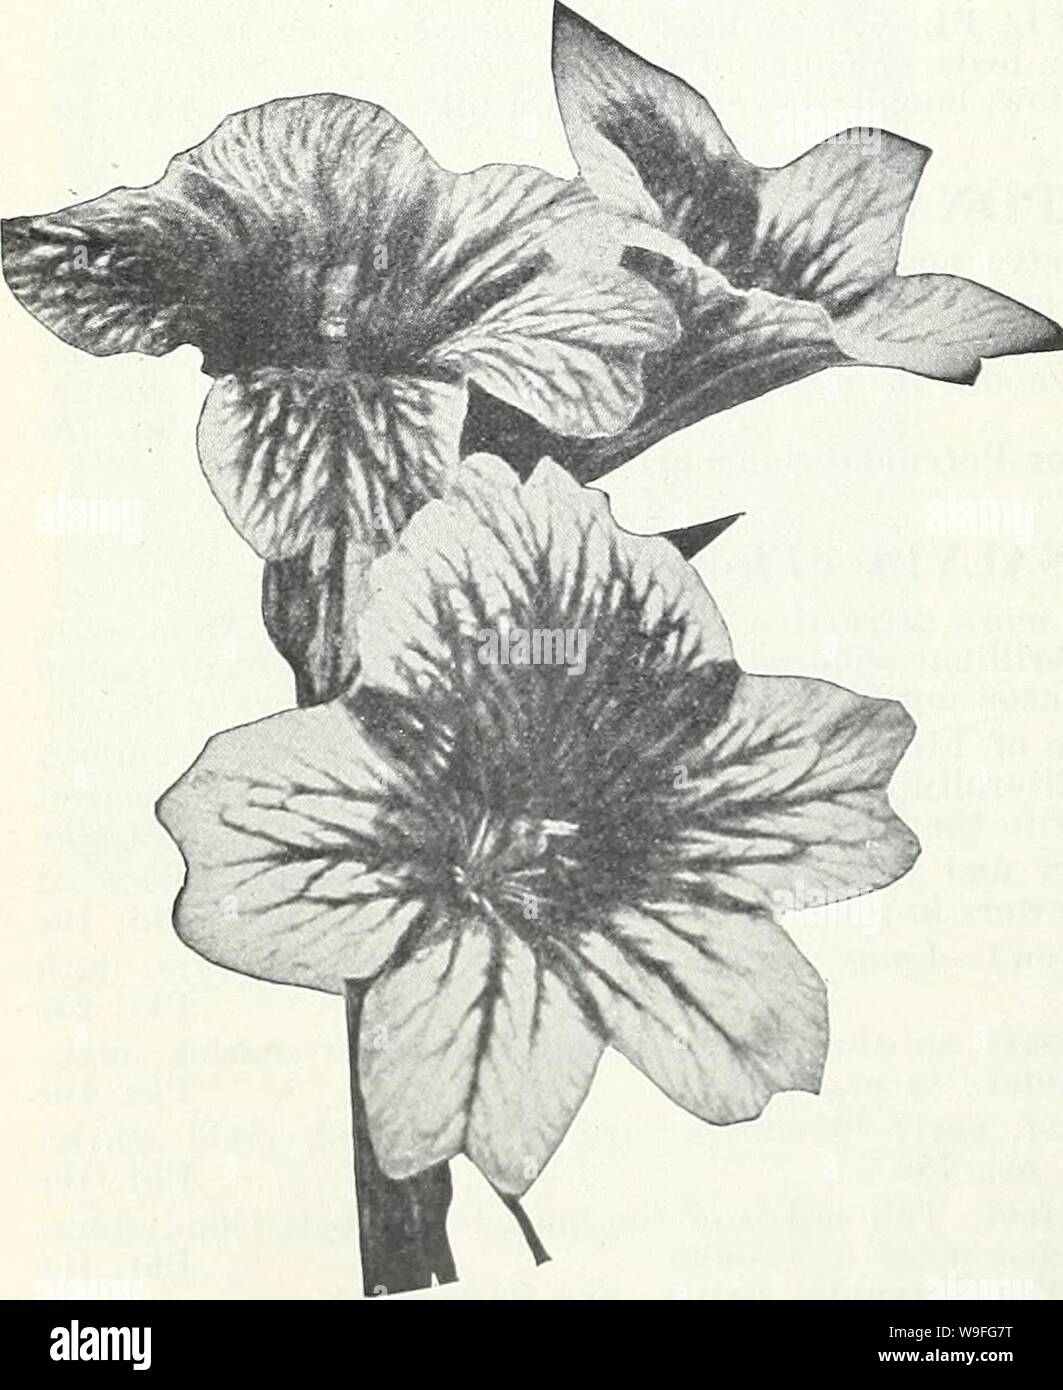 Archive image from page 39 of Currie's garden annual  spring. Currie's garden annual : spring 1934 59th year  curriesgardenann19curr 0 Year: 1934 ( SILENE (Catchfly) PENDULA COMPACTA—Dwarf, hardy annual, bearing pretty, pink flowers freely; 6 inches. .... Pkt. 10c (For Perennial Seeds, See Page 54)    SCABIOSA GIANT LOVELINESS Loveliness is a glorious new color in annual Scabiosa, the blossoms range through varying tones of delicate Salmon Rose, it is unsurpassed as a cut flower. It has long, stiff stems and a delightful fragrance Pkt. 15c (For Perennial Scabiosa, See Page 54) SMILAX MYRSIPHYL Stock Photo